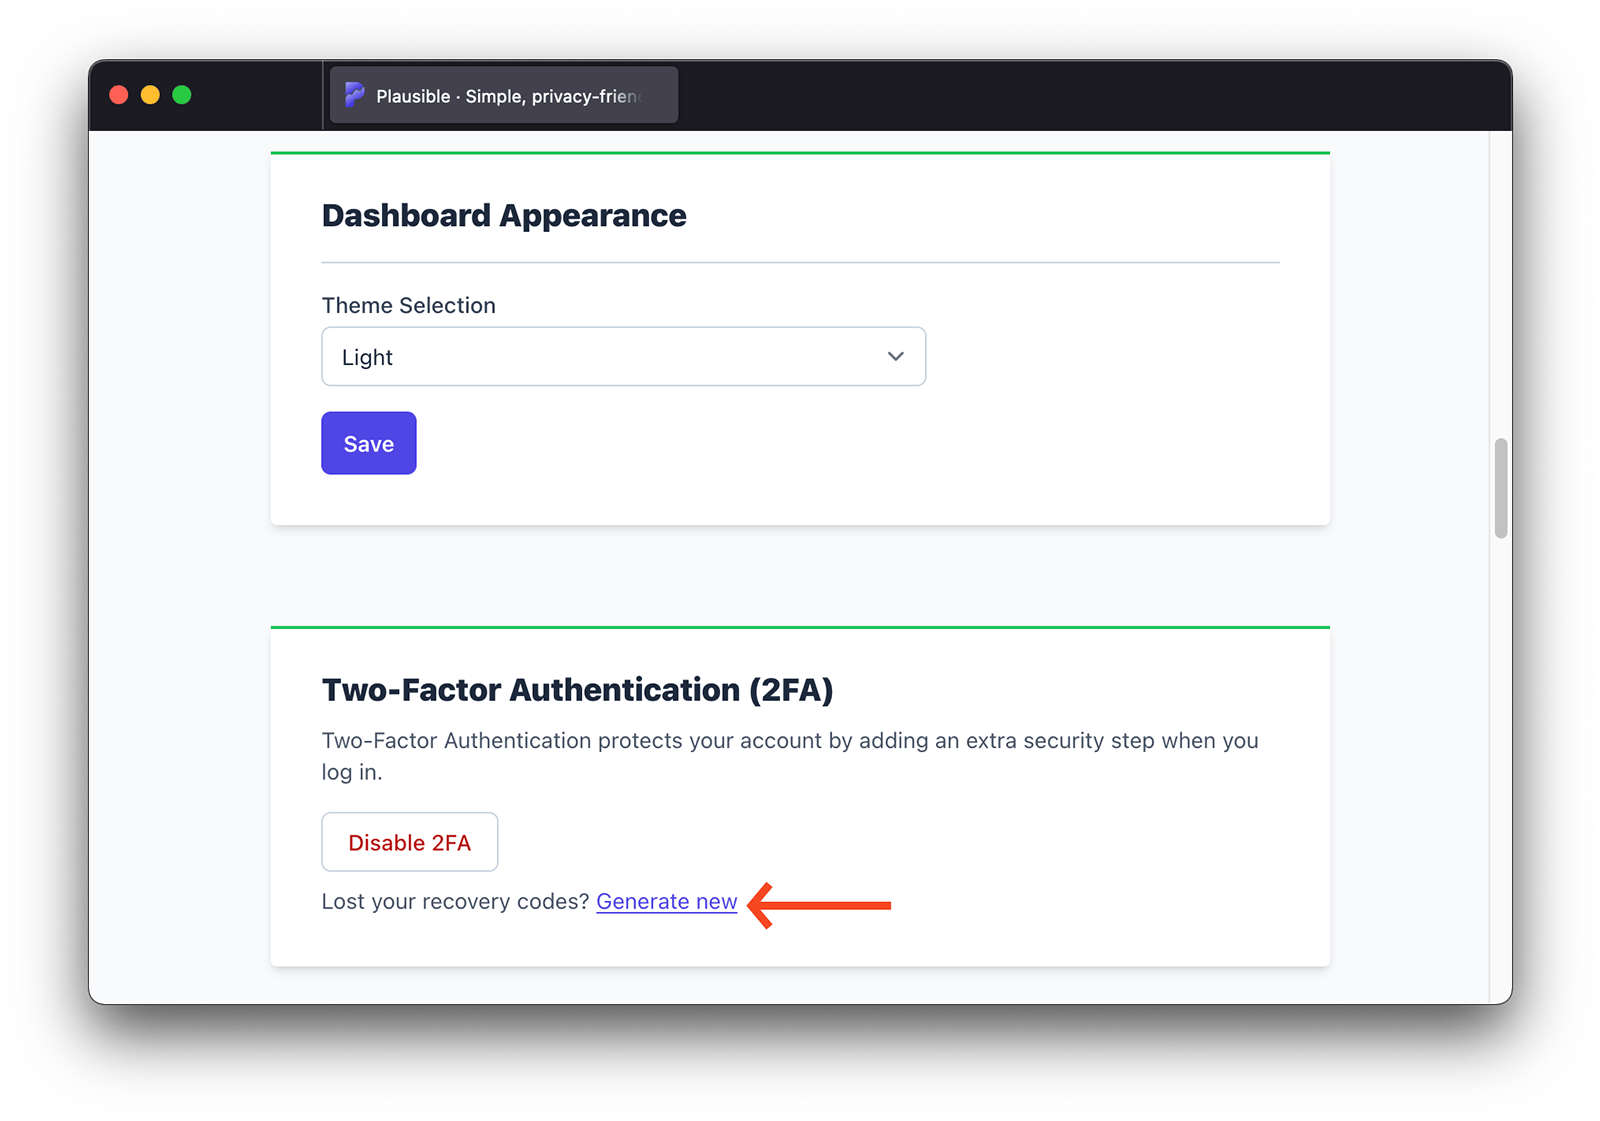 Generate new 2FA recovery codes